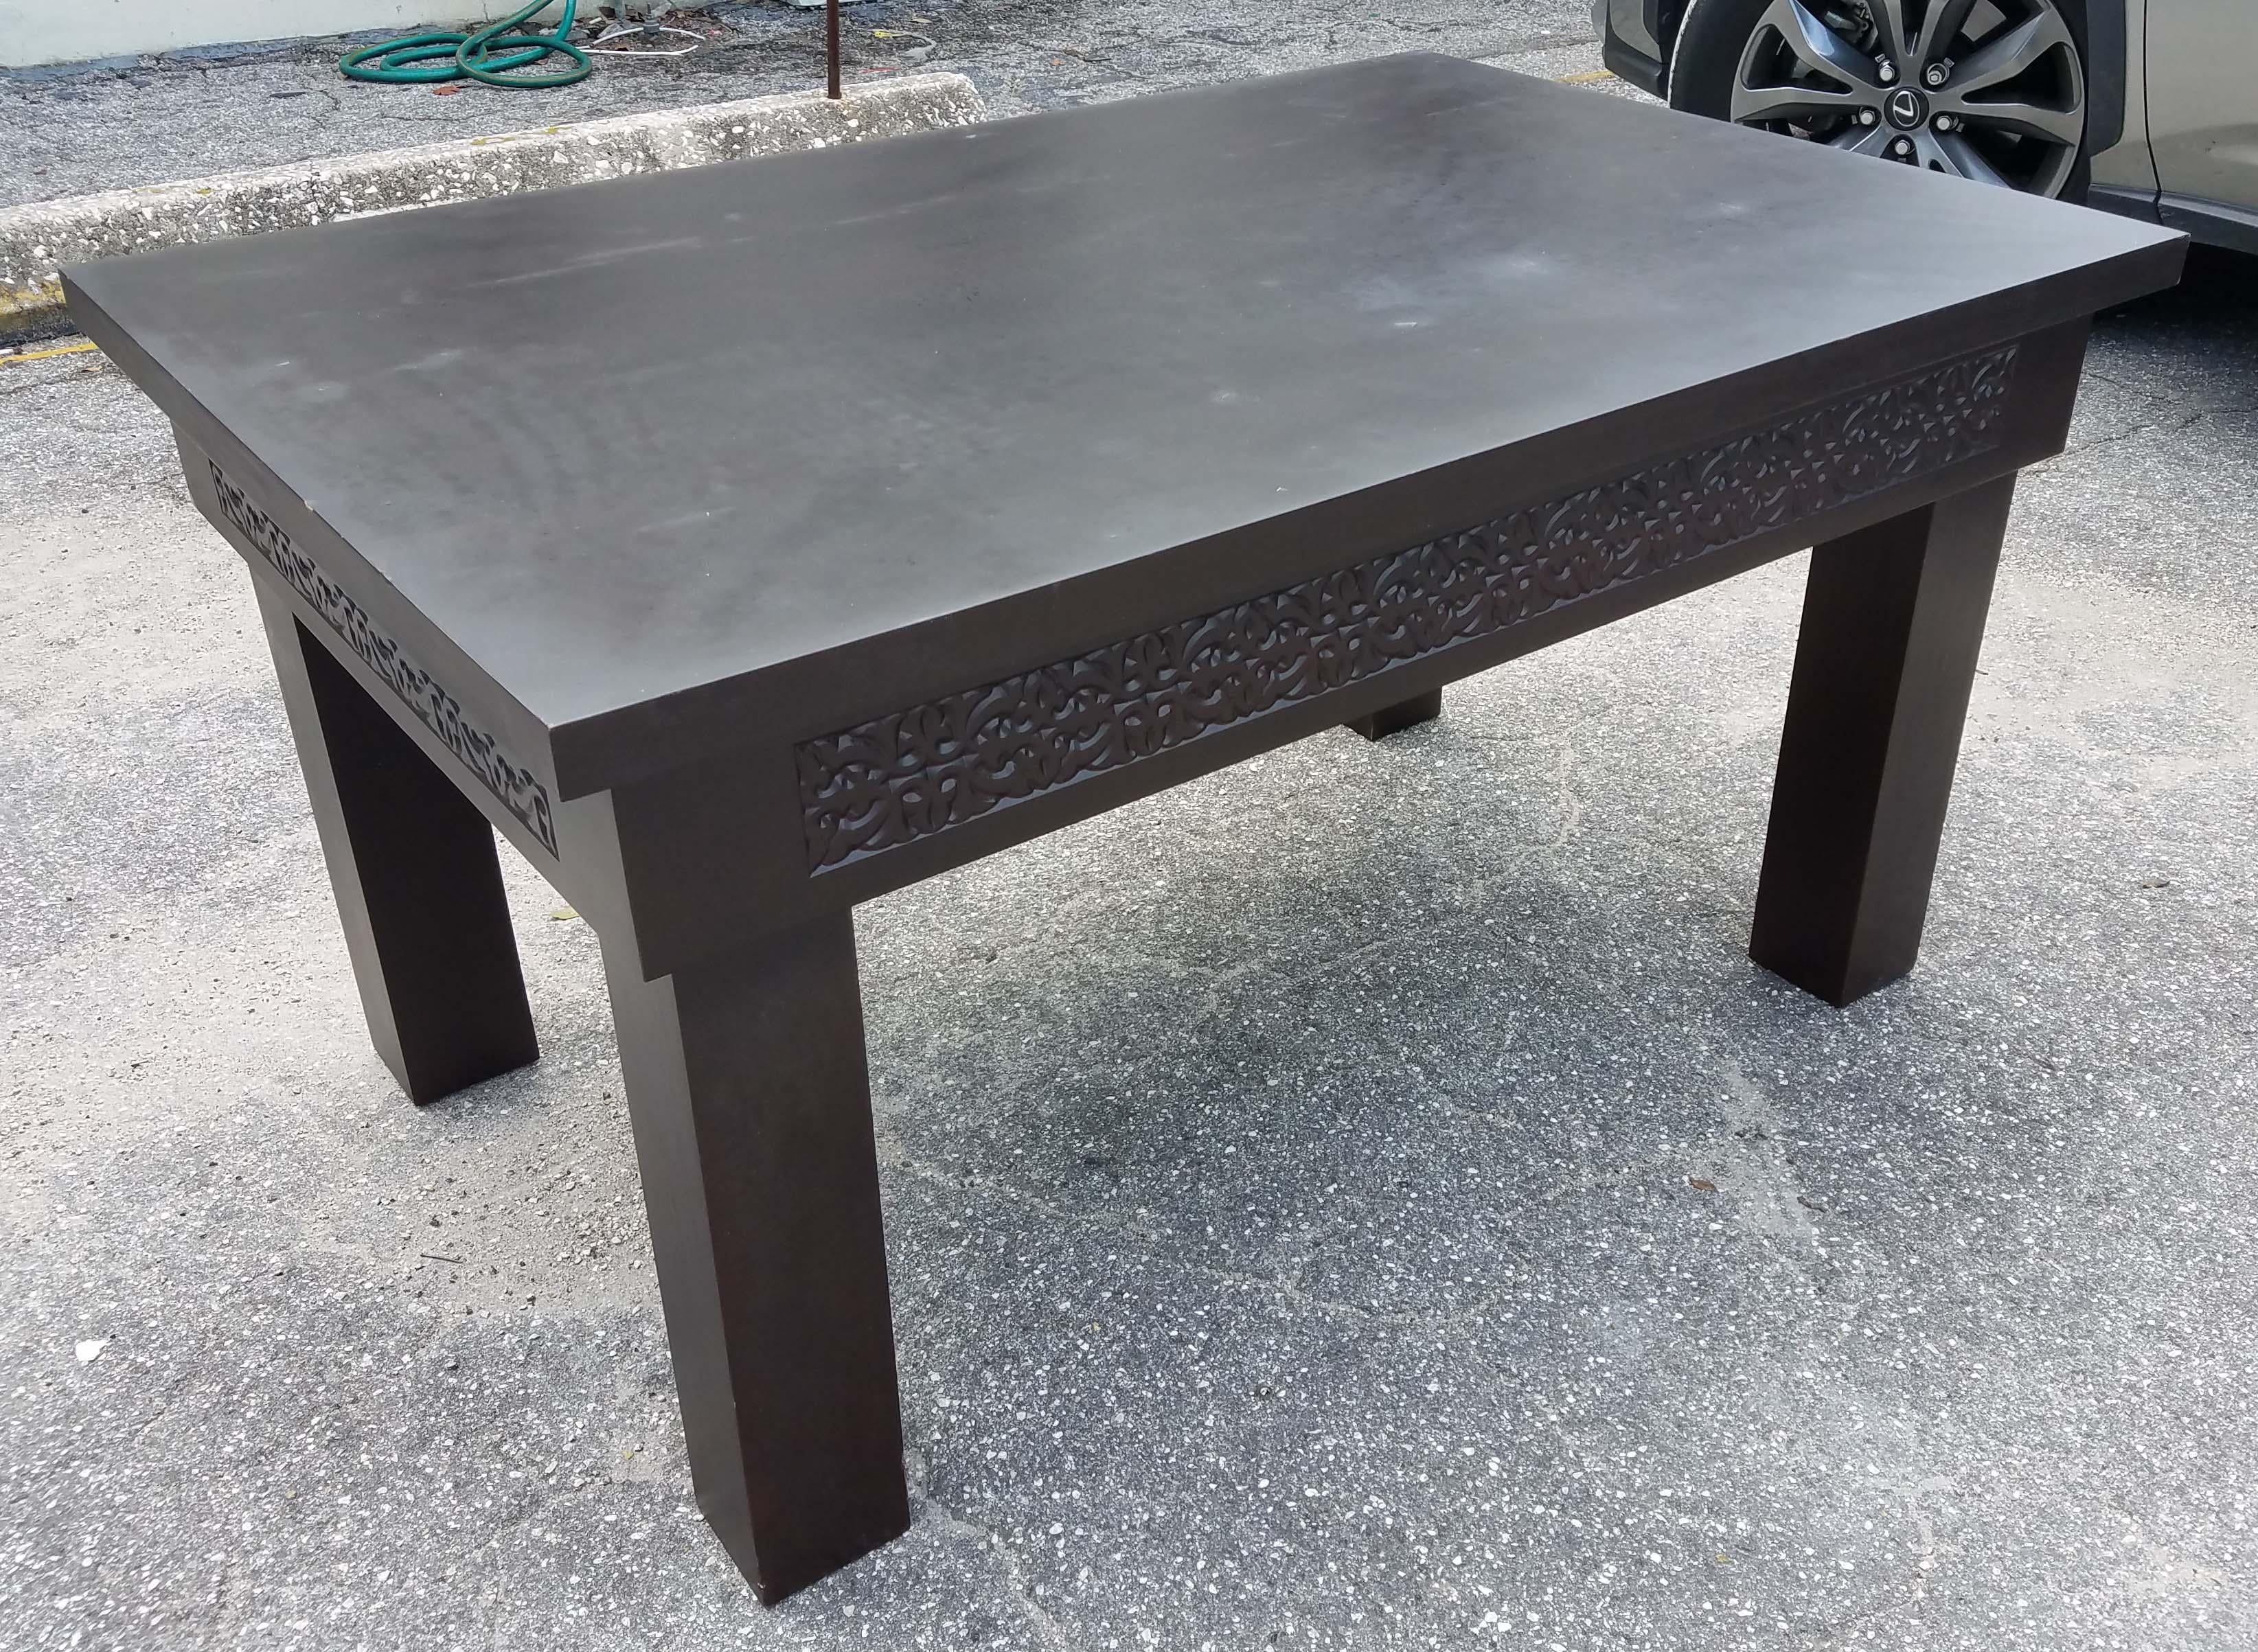 Very exotic Moroccan wooden coffee table. Rectangular shape and offers an amazing look. With its detailed carving along the sides, this side table will sure be a excellent add-on to your décor. It measures approximately 47